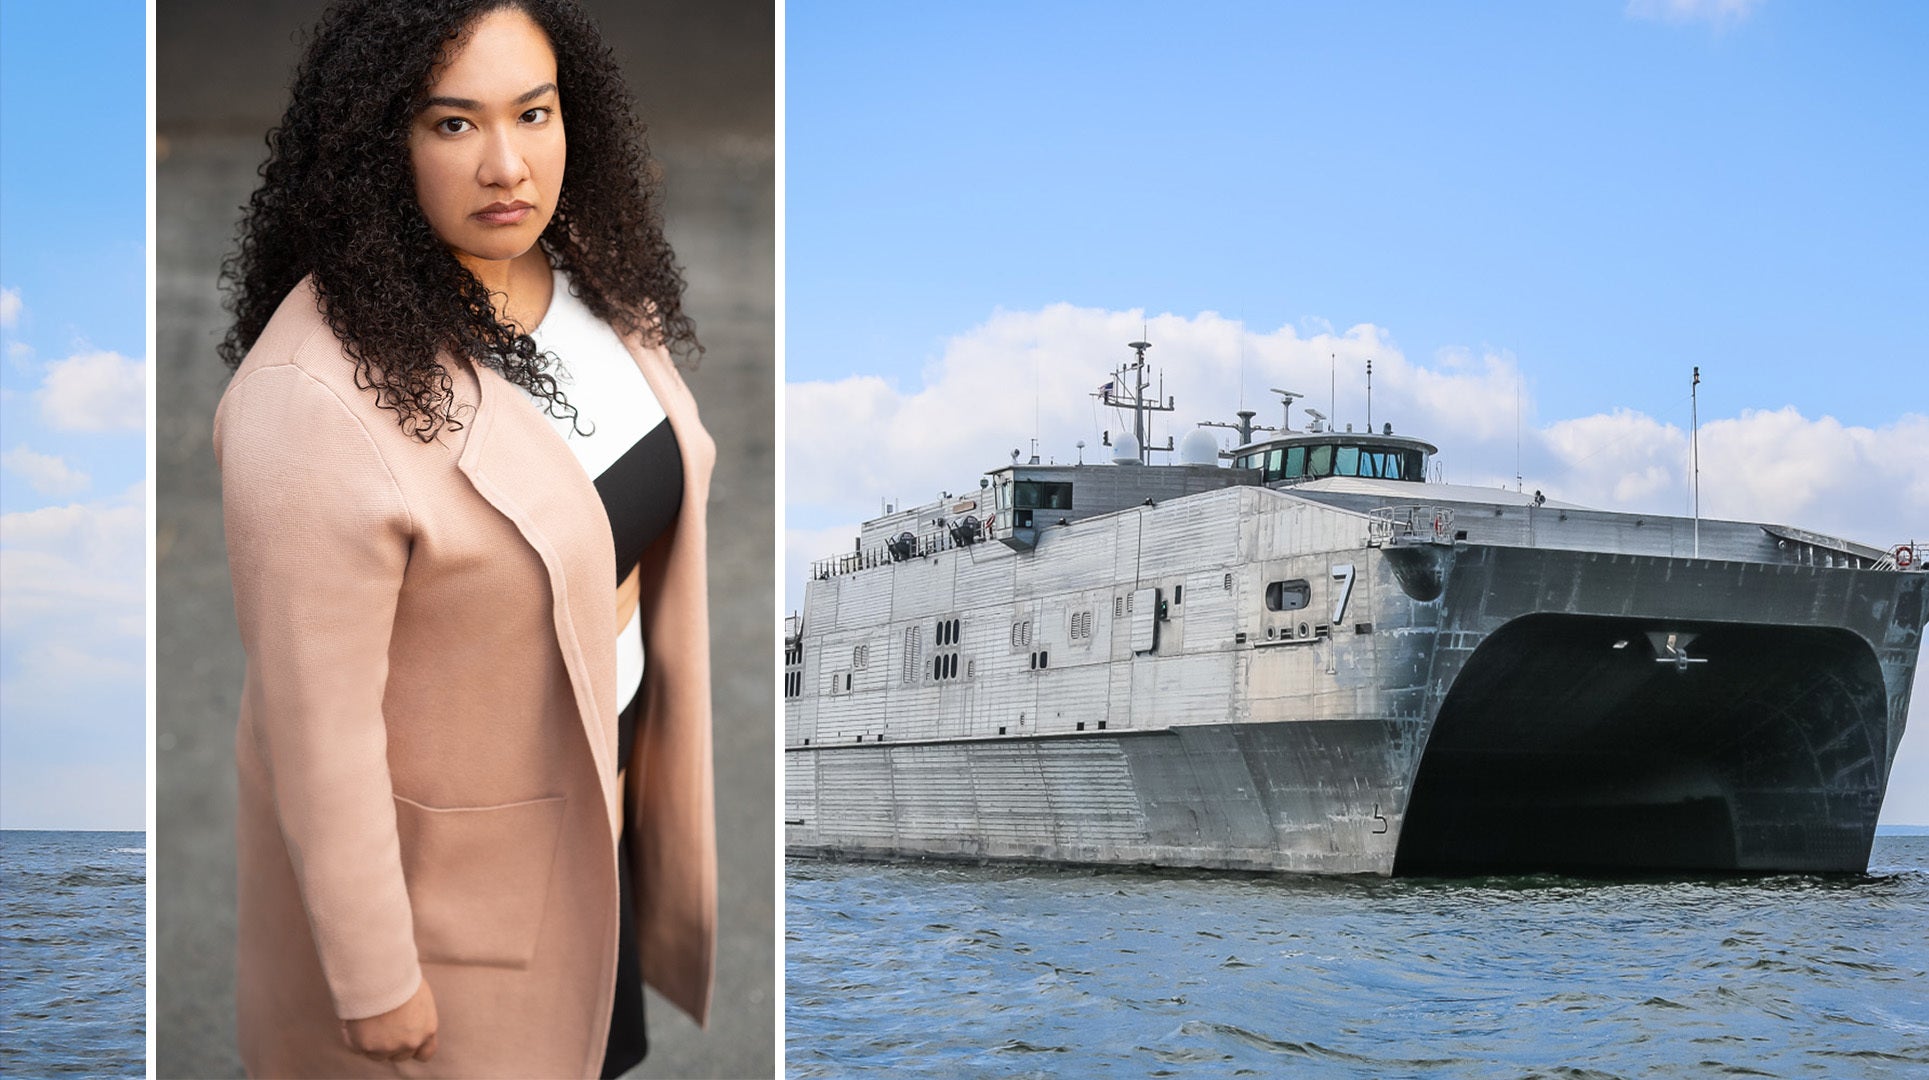 Elsie Dominguez, a graduate of the U.S. Merchant Marine Academy and a civilian mariner on the Navy's sealift fleet, alleges that her ship’s captain raped her, according to a complaint filed in New Jersey federal court. Photo courtesy Elsie Dominguez and US Navy.